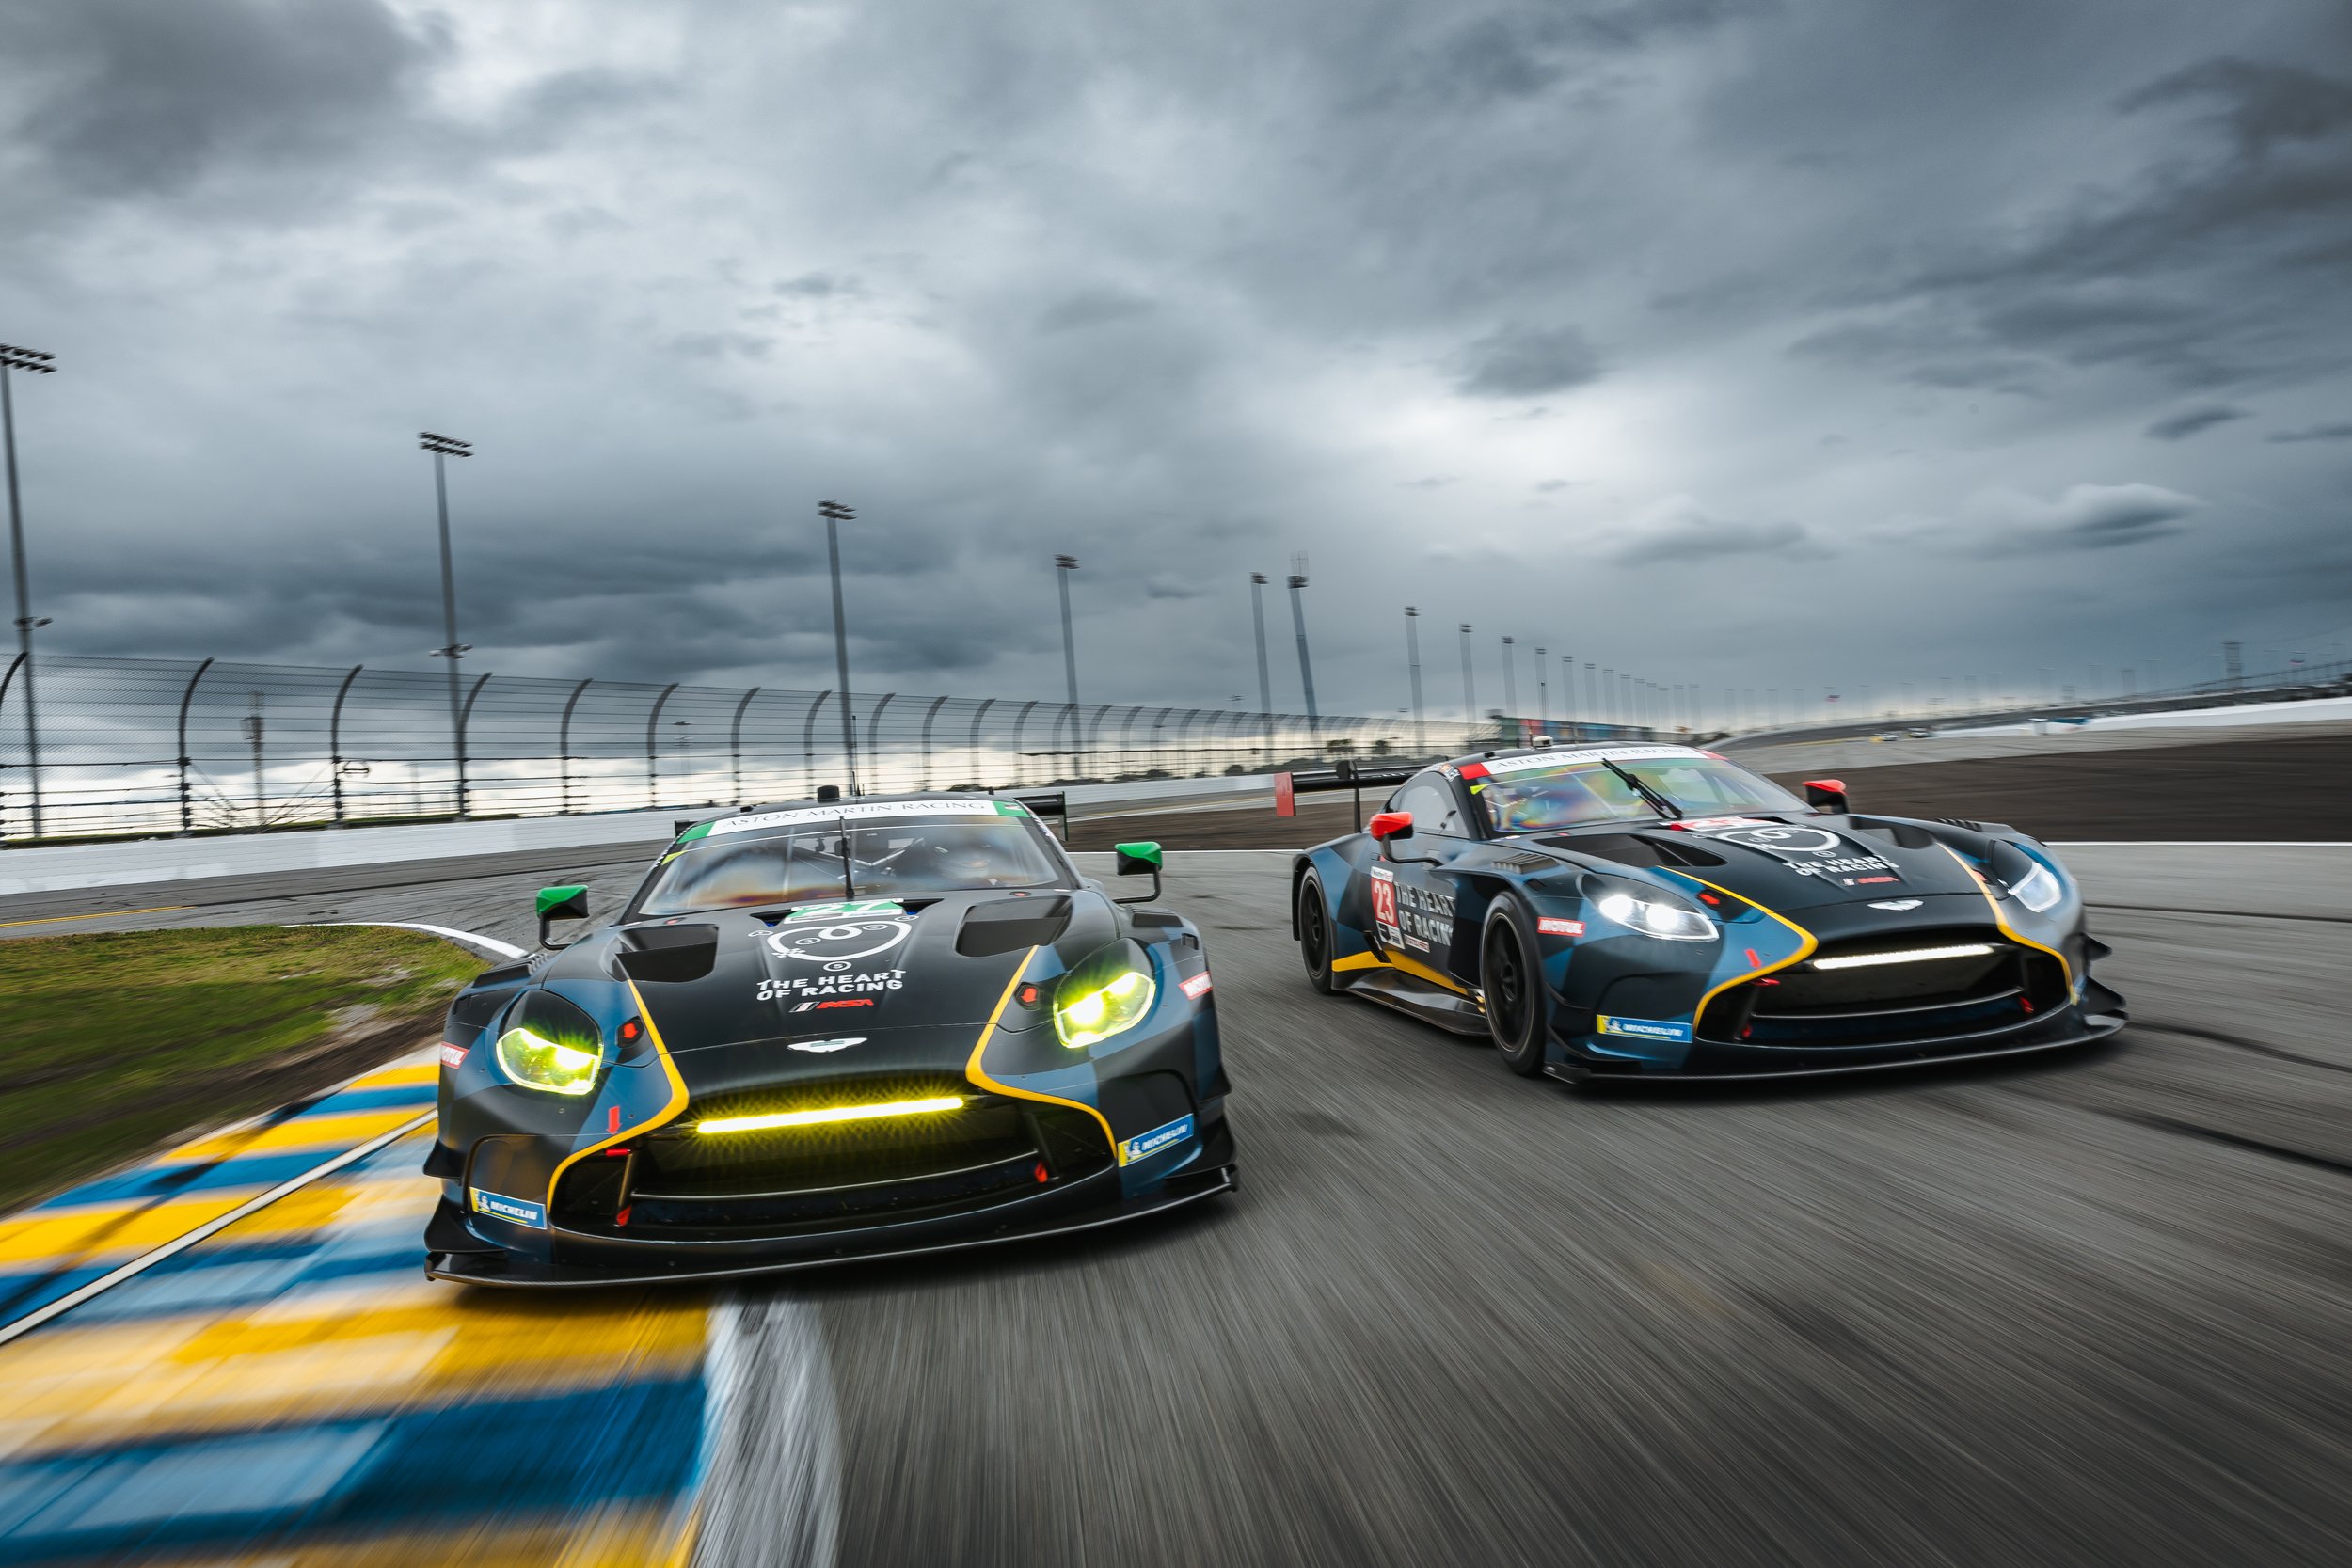 The Heart of Racing Sets Eyes on Twelve Hours of Sebring — The Heart of